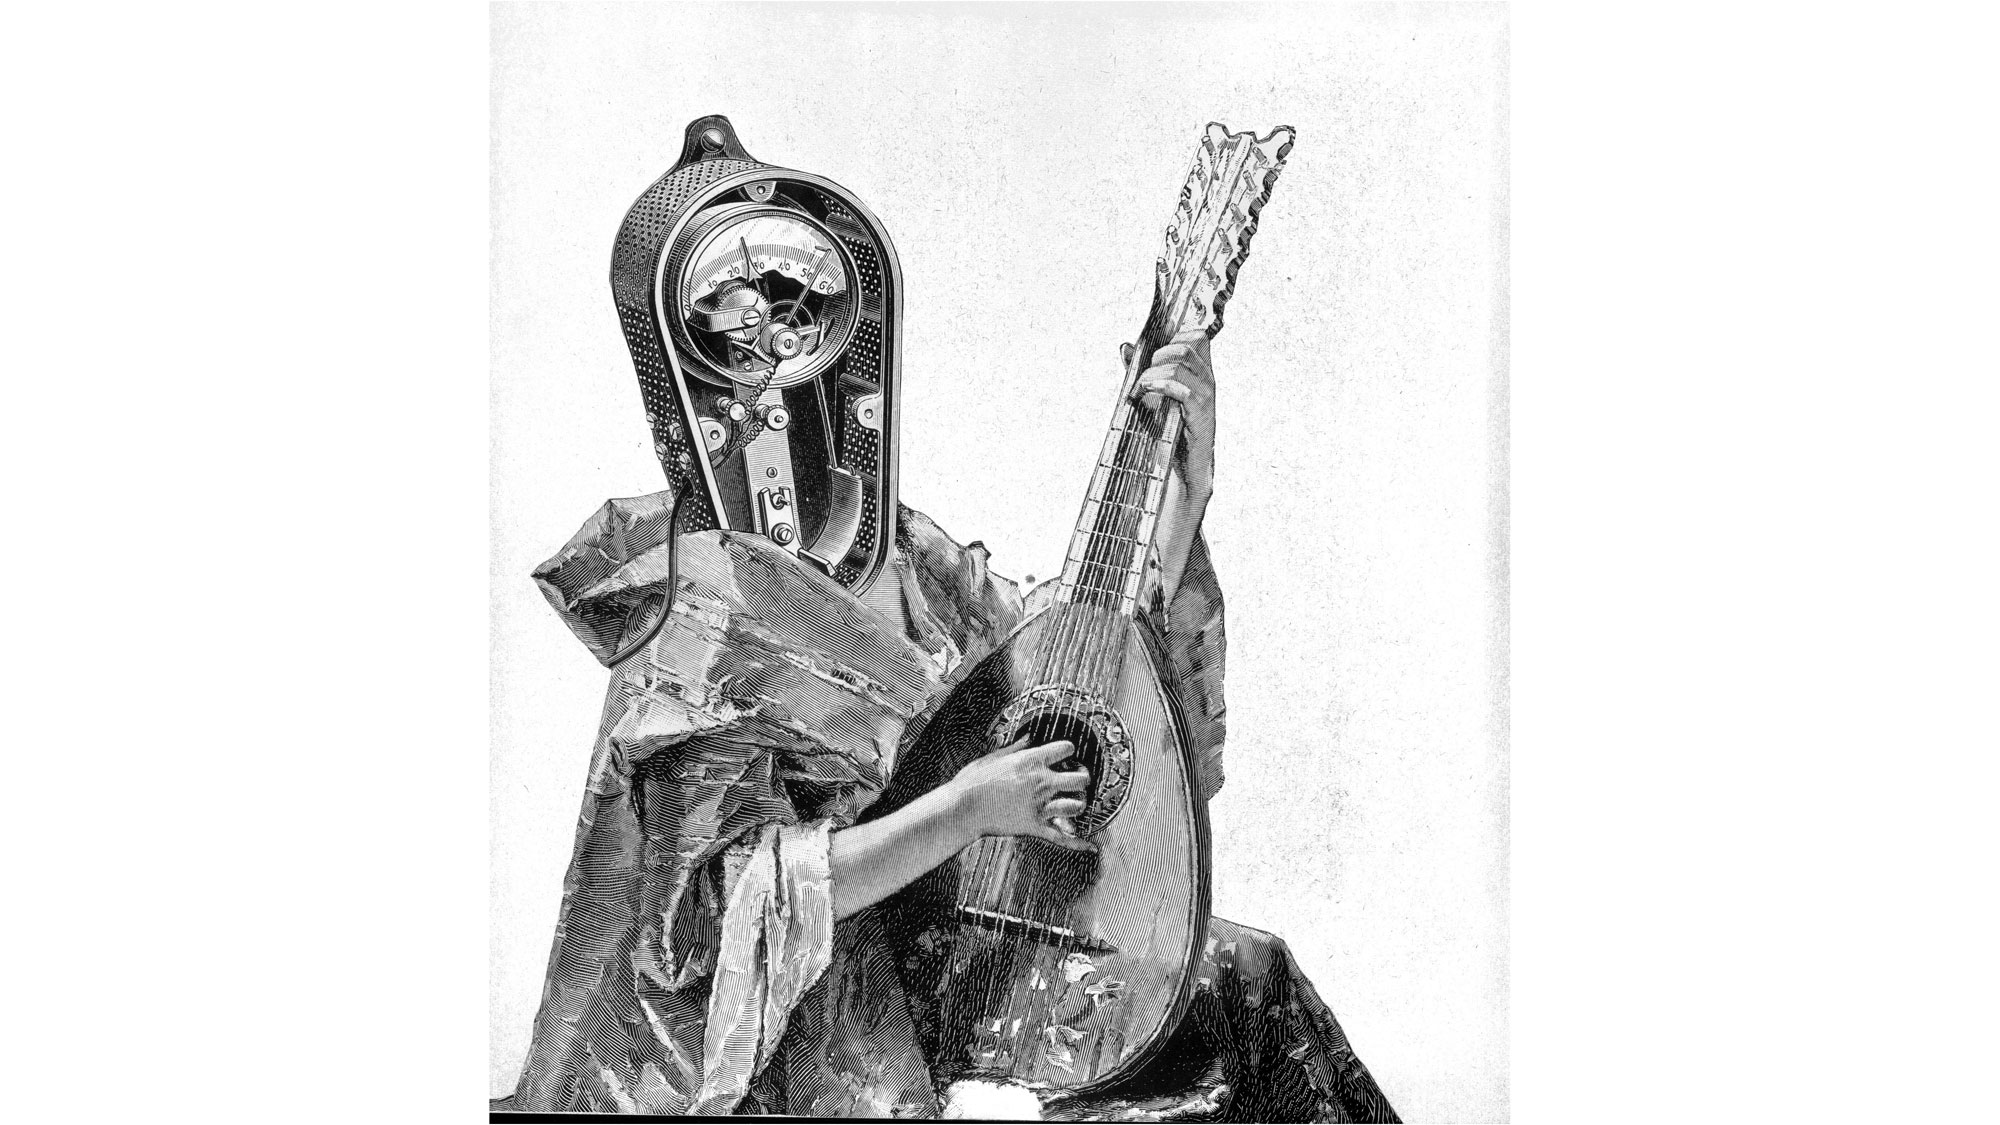 An illustration of a human body playing a mandolin with a gauge or clock as a head. 